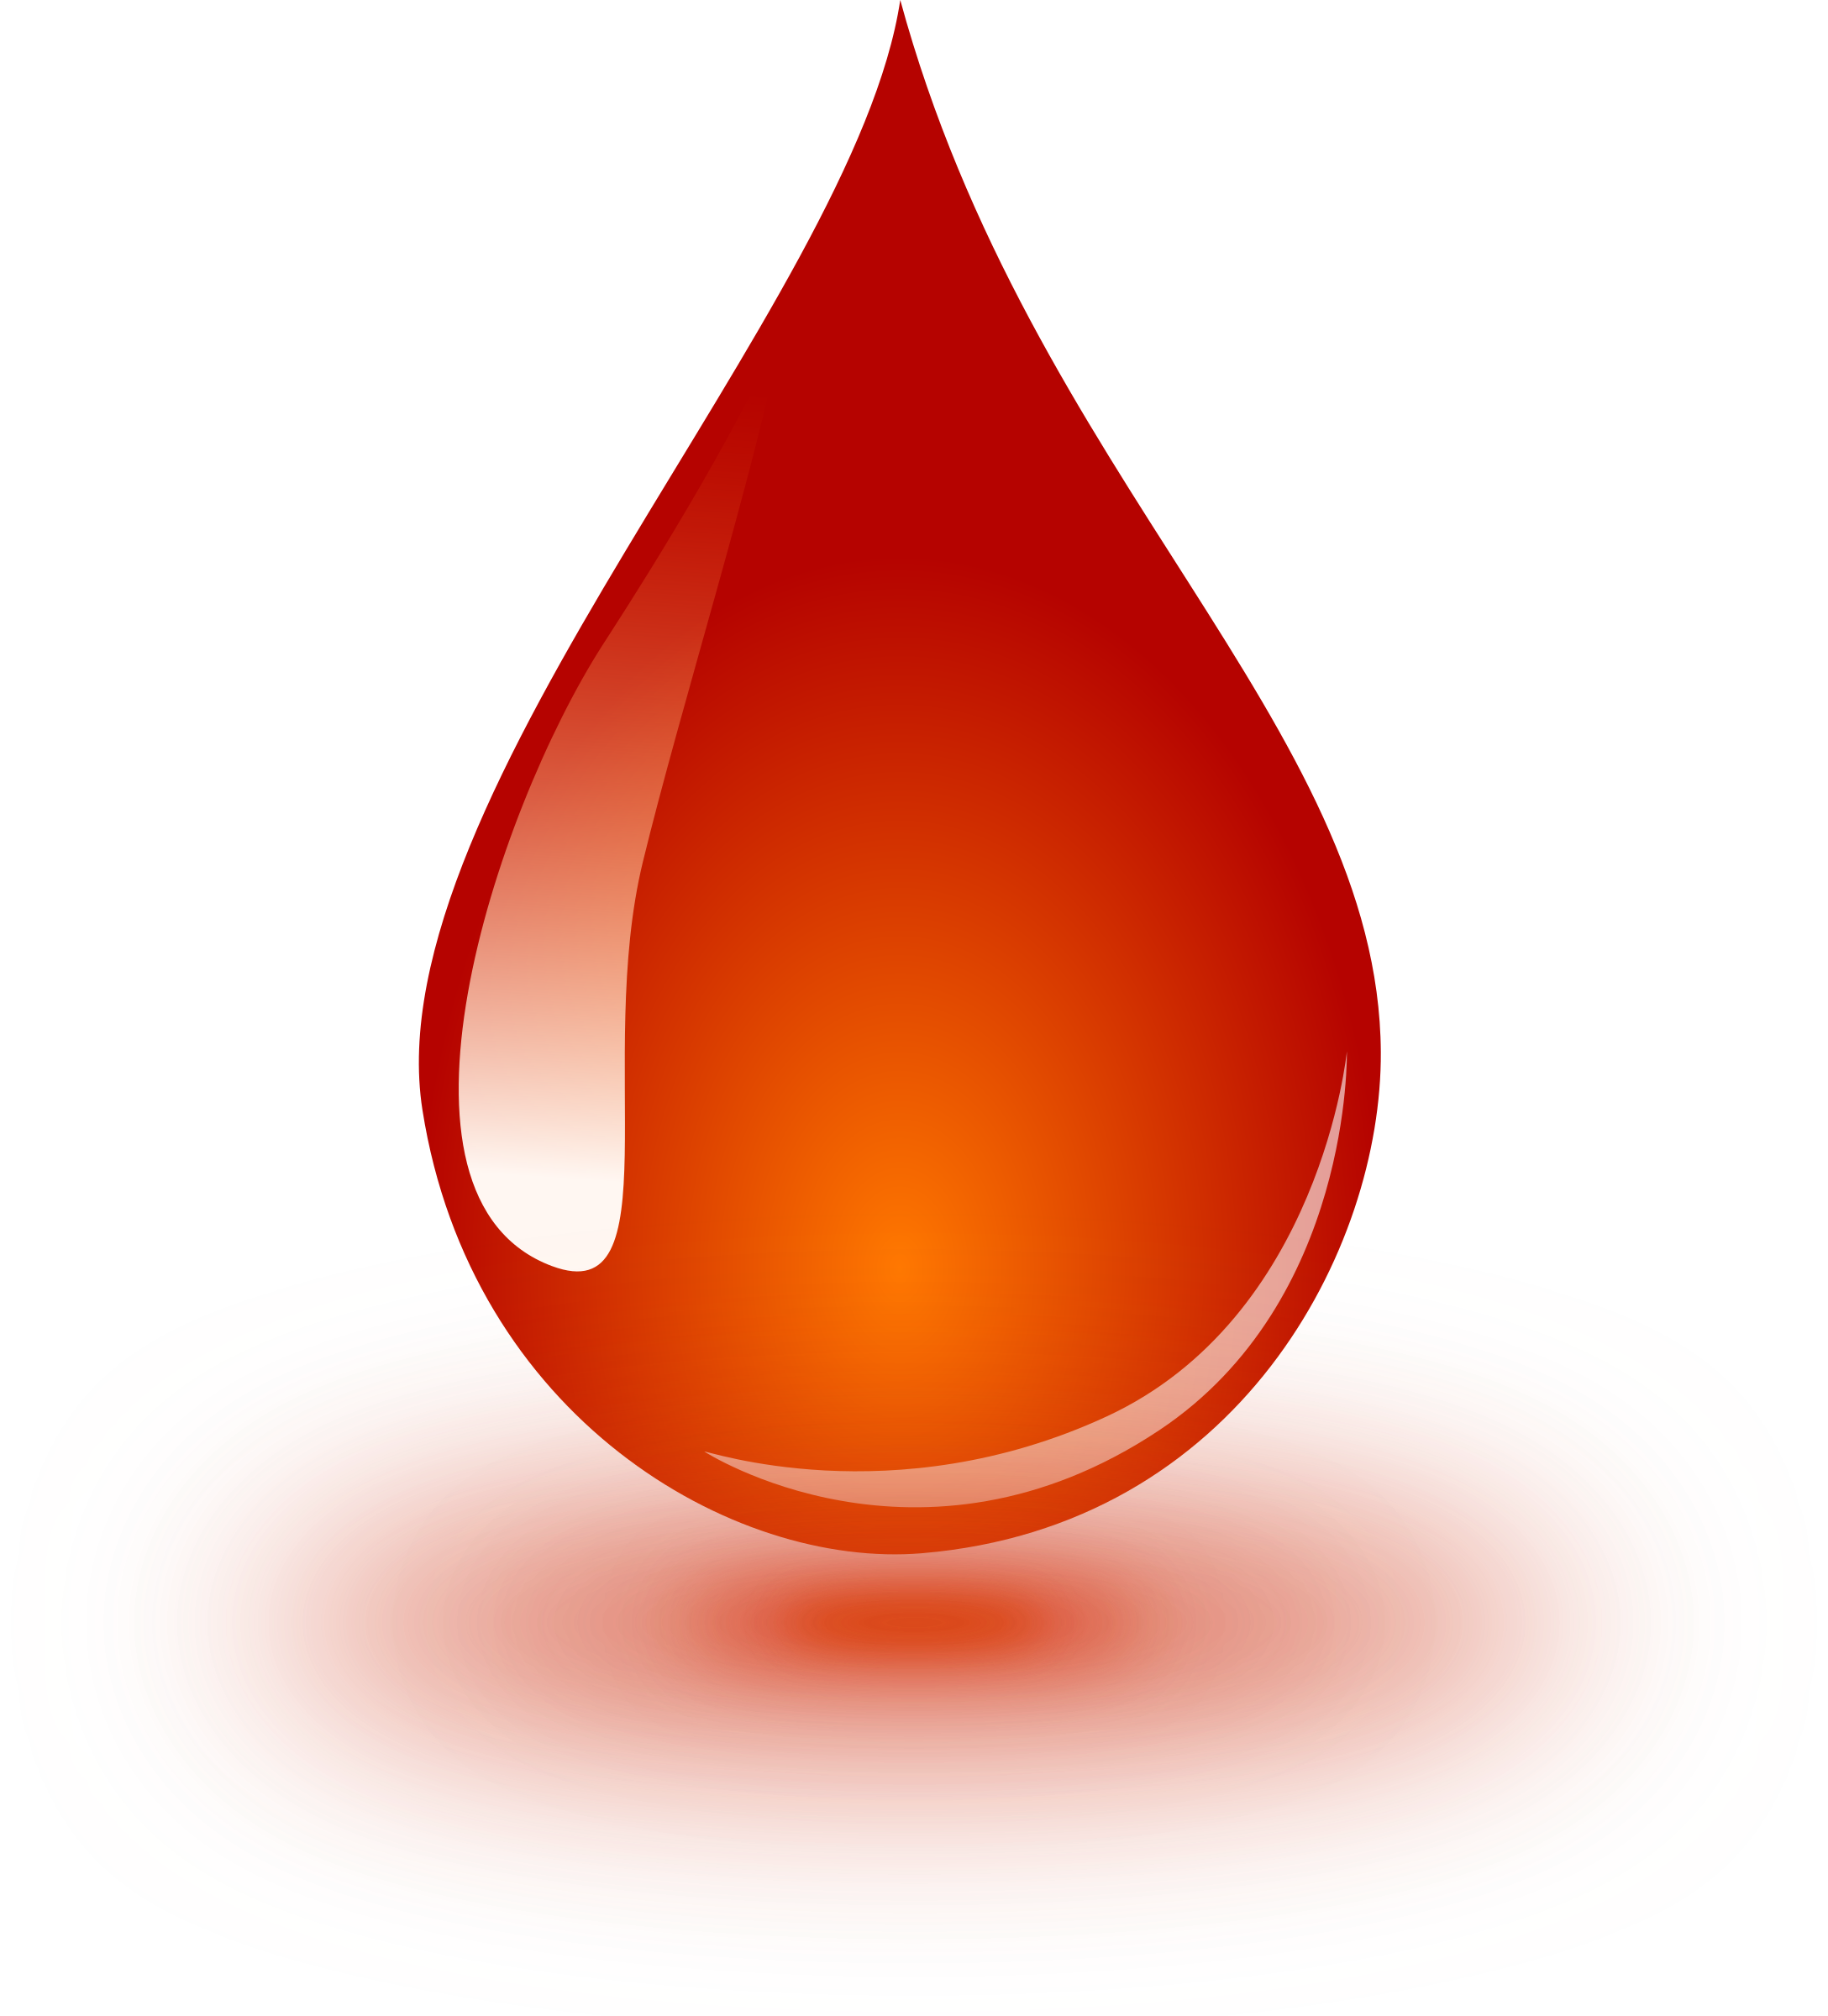 clipart images of blood - photo #34